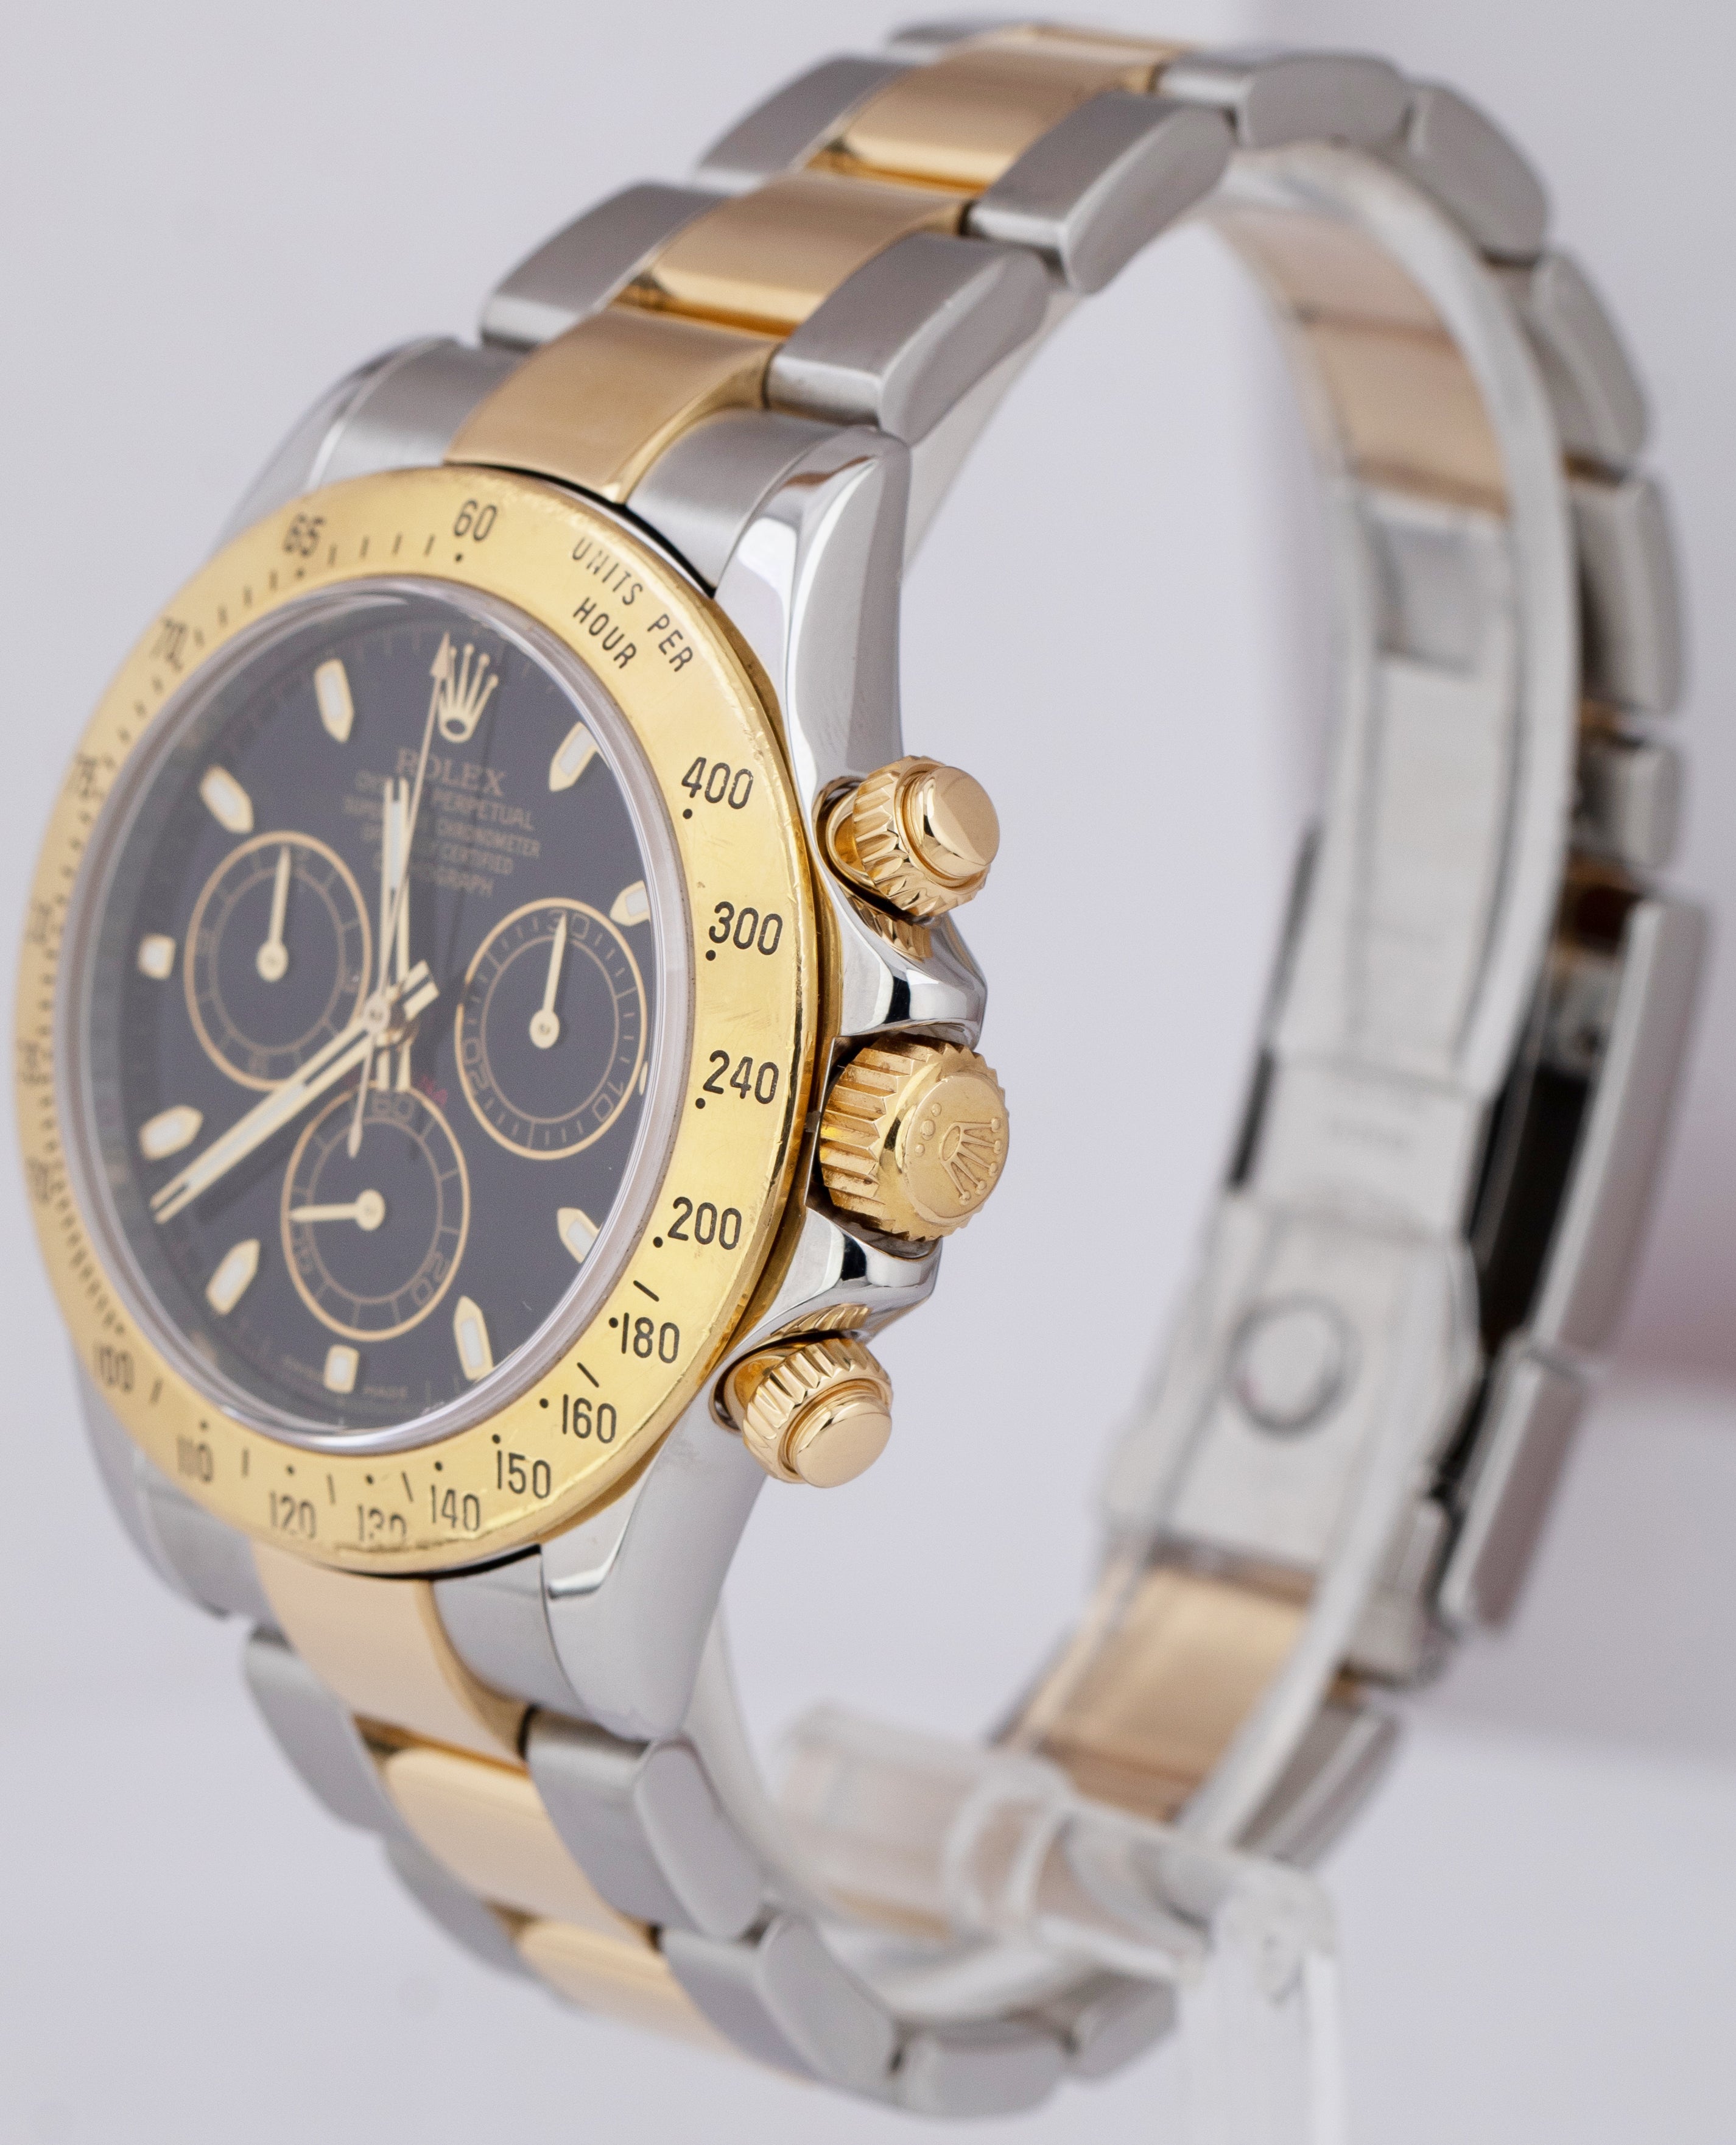 2008 Rolex Daytona Cosmograph 40mm Black Gold Two-Tone Stainless Watch 116523